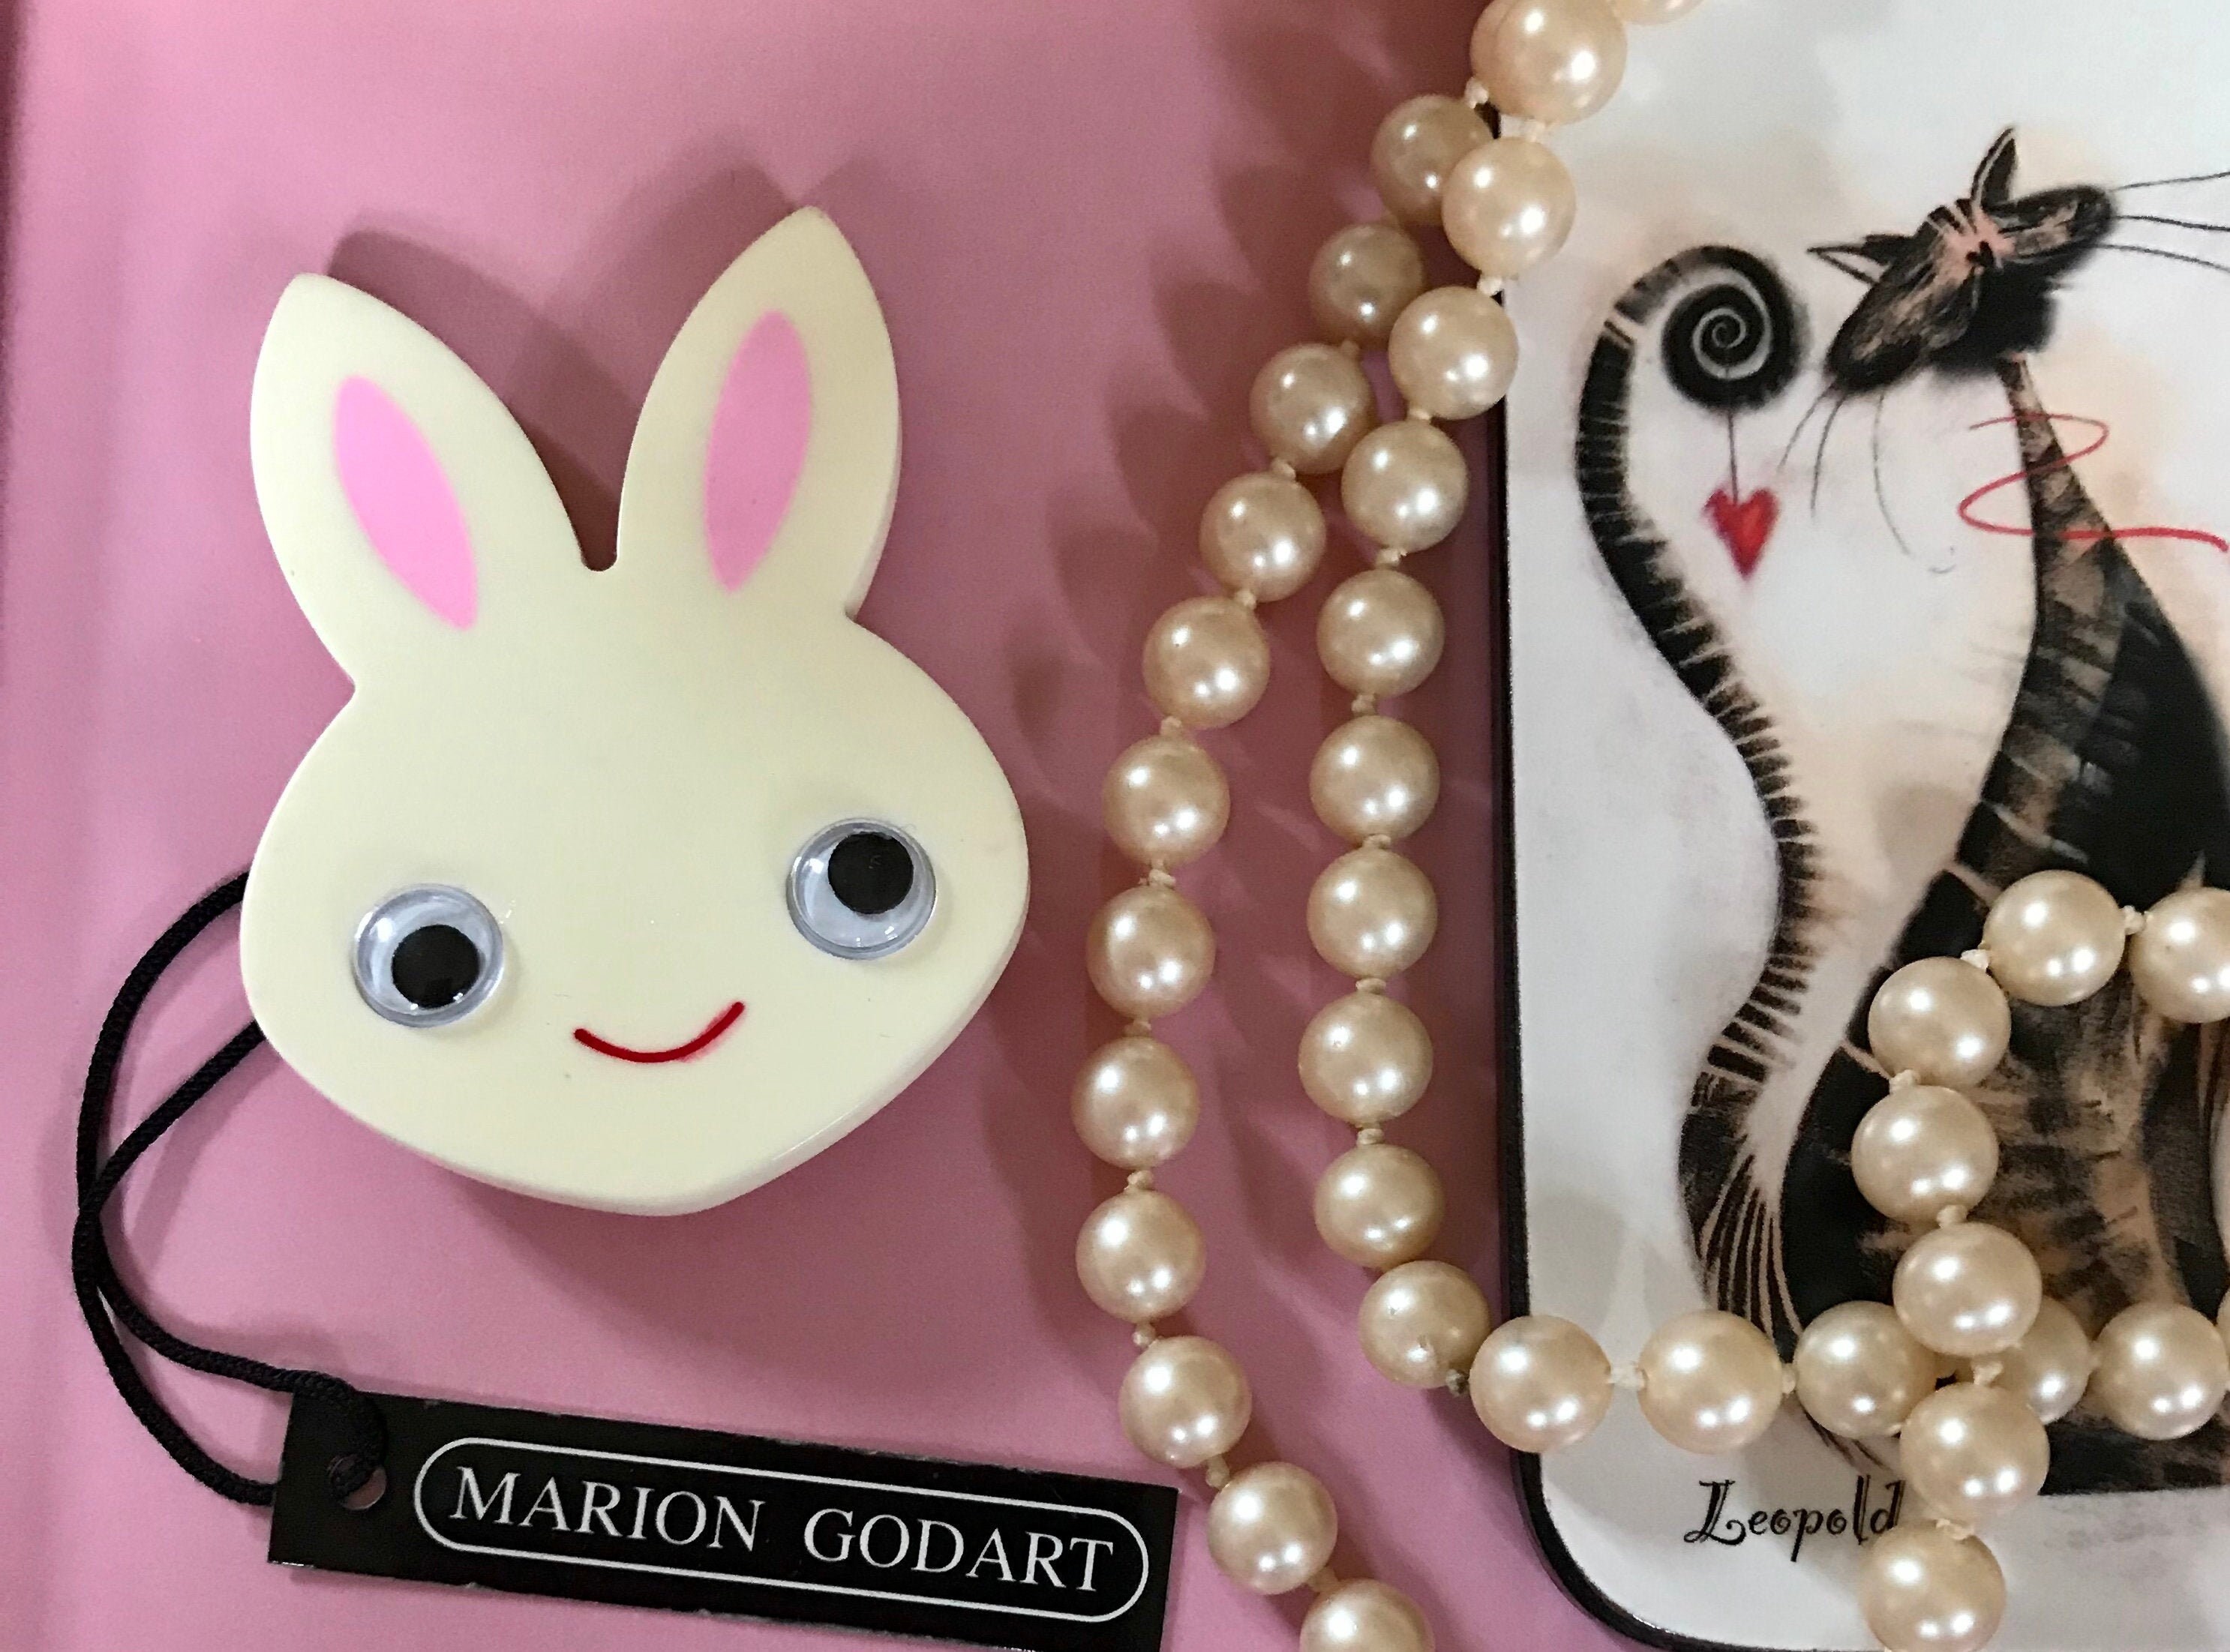 MARION GODART Paris Broche \u00c9l\u00e9phant Strass Ivoire Small Ivory White Rhinestone Mother and Child Lucky Elephant Brooch French Design Jewelry